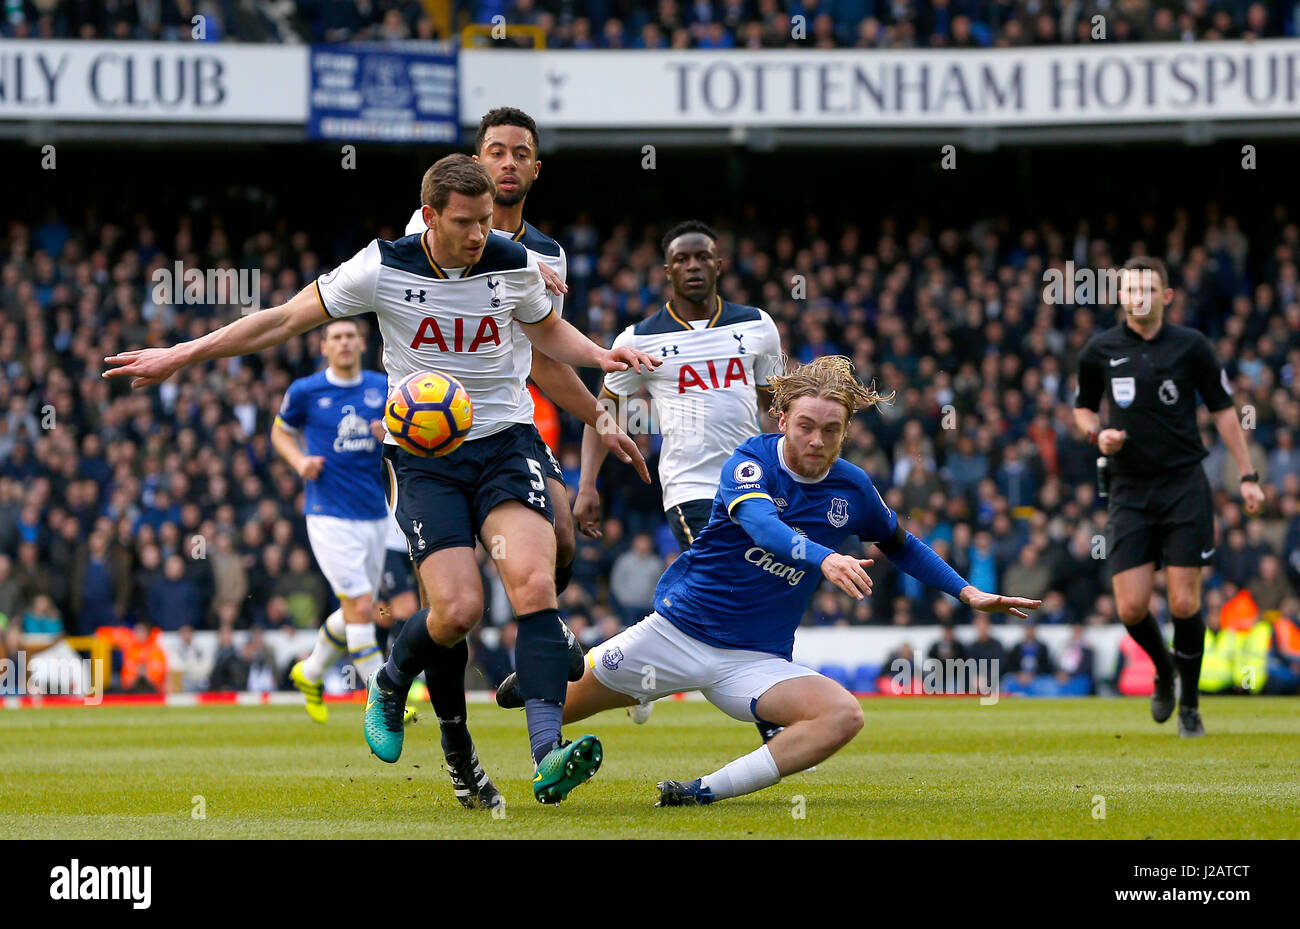 Tom Davies of Everton tackles Jan Vertonghen of Tottenham  during the Premier League match between Tottenham Hotspur and Everton at White Hart Lane in London. March 5, 2017. James Boardman / Telephoto Images EDITORIAL USE ONLY  FA Premier League and Football League images are subject to DataCo Licence see www.football-dataco.com Stock Photo